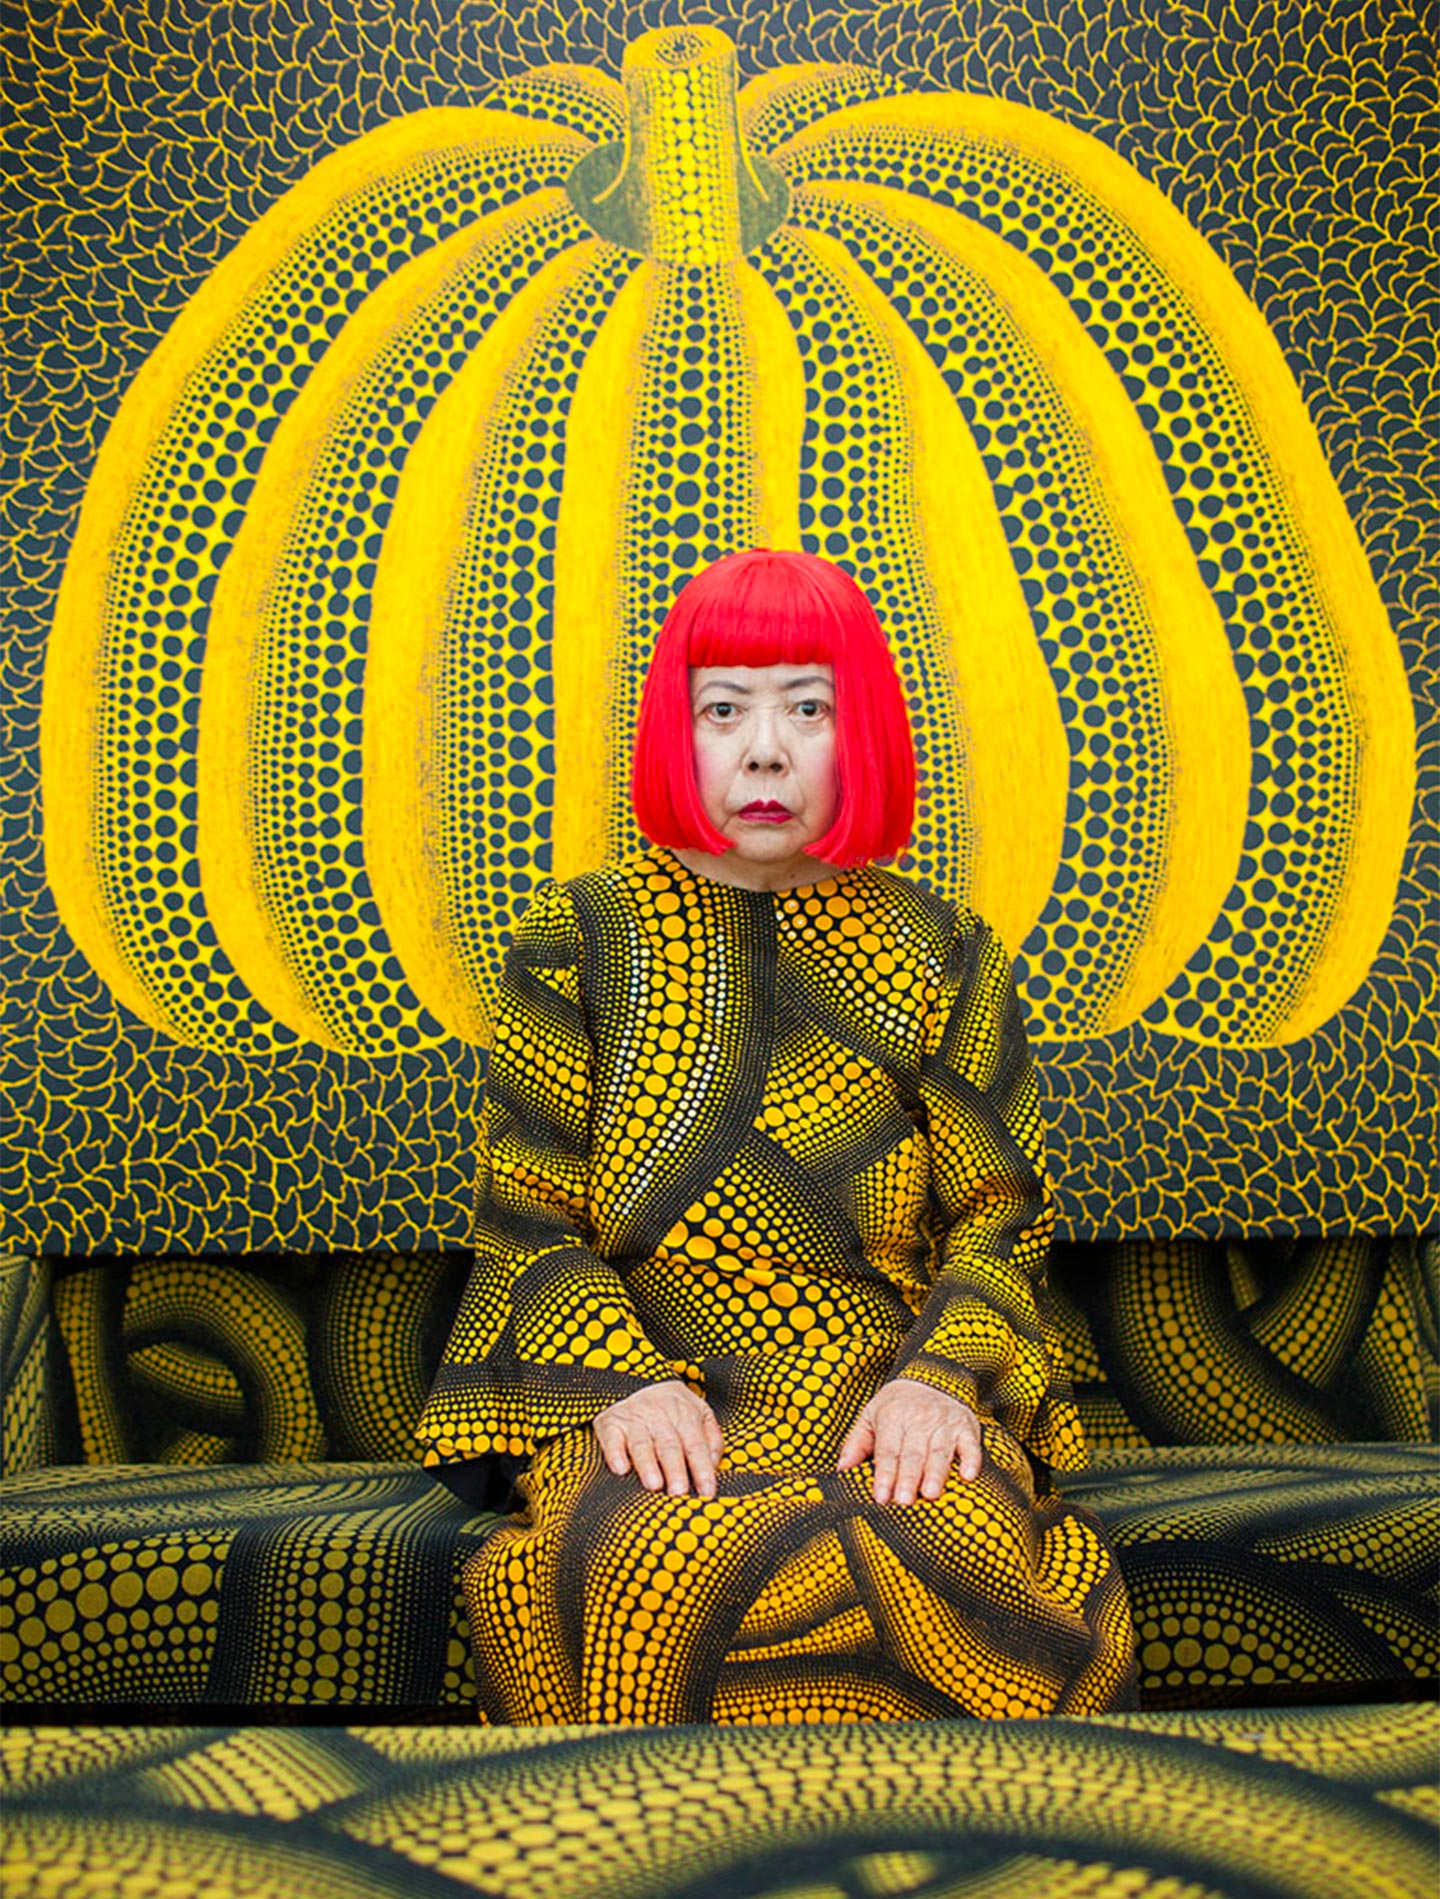 Yayoi Kusama in front of one of her works